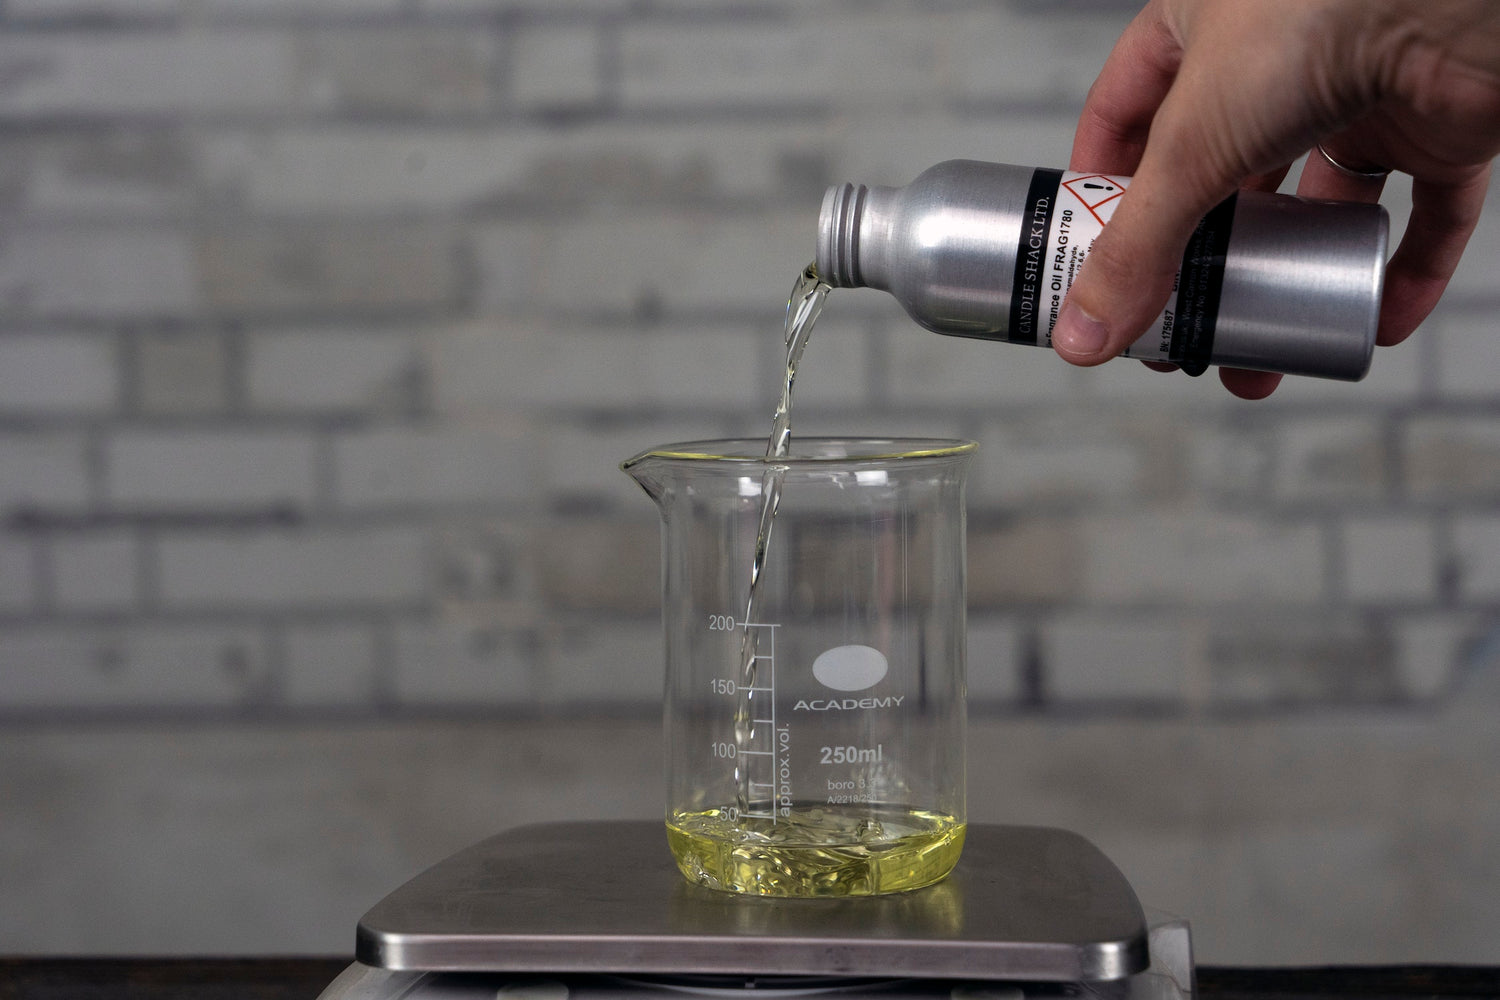 Pouring fragrance oil into a beaker on a scale. Fragrance, Diffuser oil, DIY diffuser